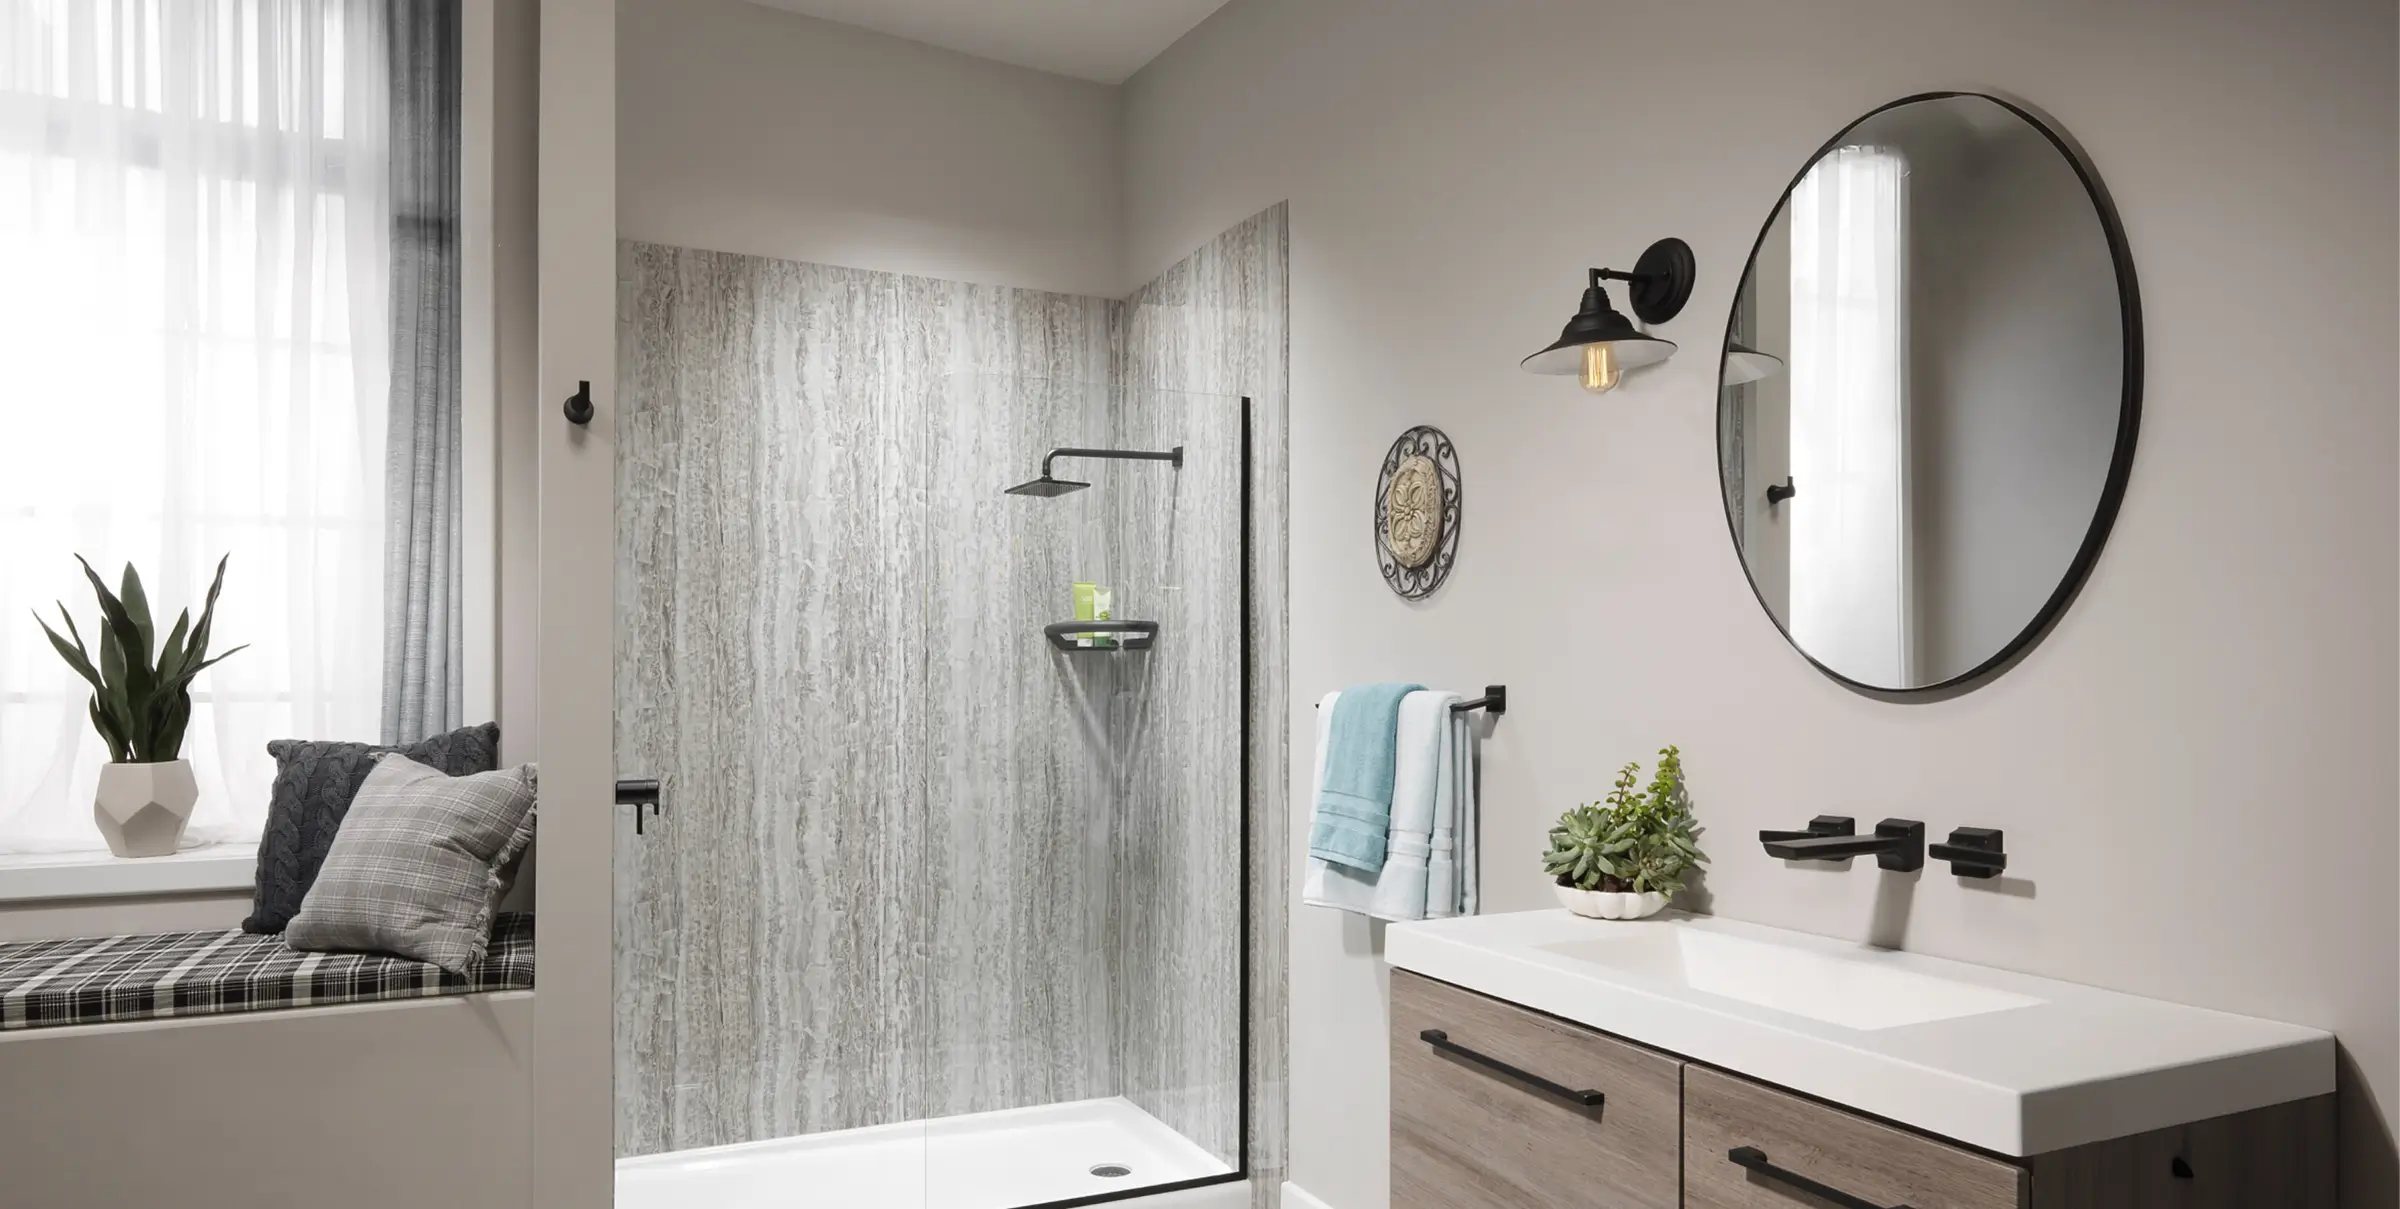 Featured image for “7 Walk-In Shower Ideas for Small Bathrooms”